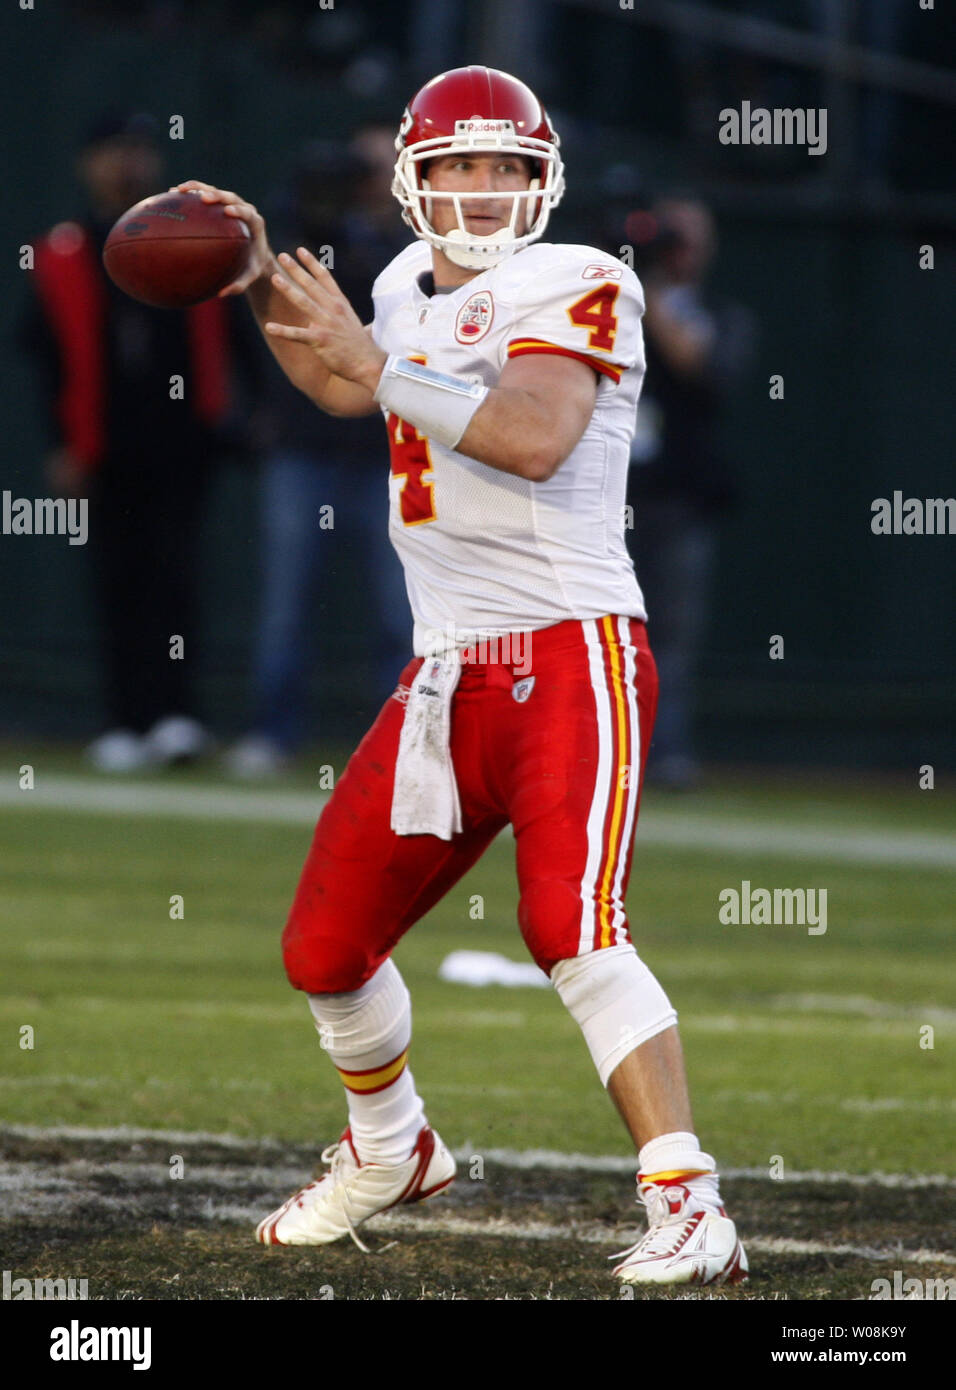 Kansas City Chiefs QB Tyler Thigpen drops back to pass during third quarter play against the Oakland Raiders at the Oakland Coliseum in Oakland, California on November 30, 2008. The Chiefs defeated the Raiders 20-13.   (UPI Photo/Terry Schmitt) Stock Photo